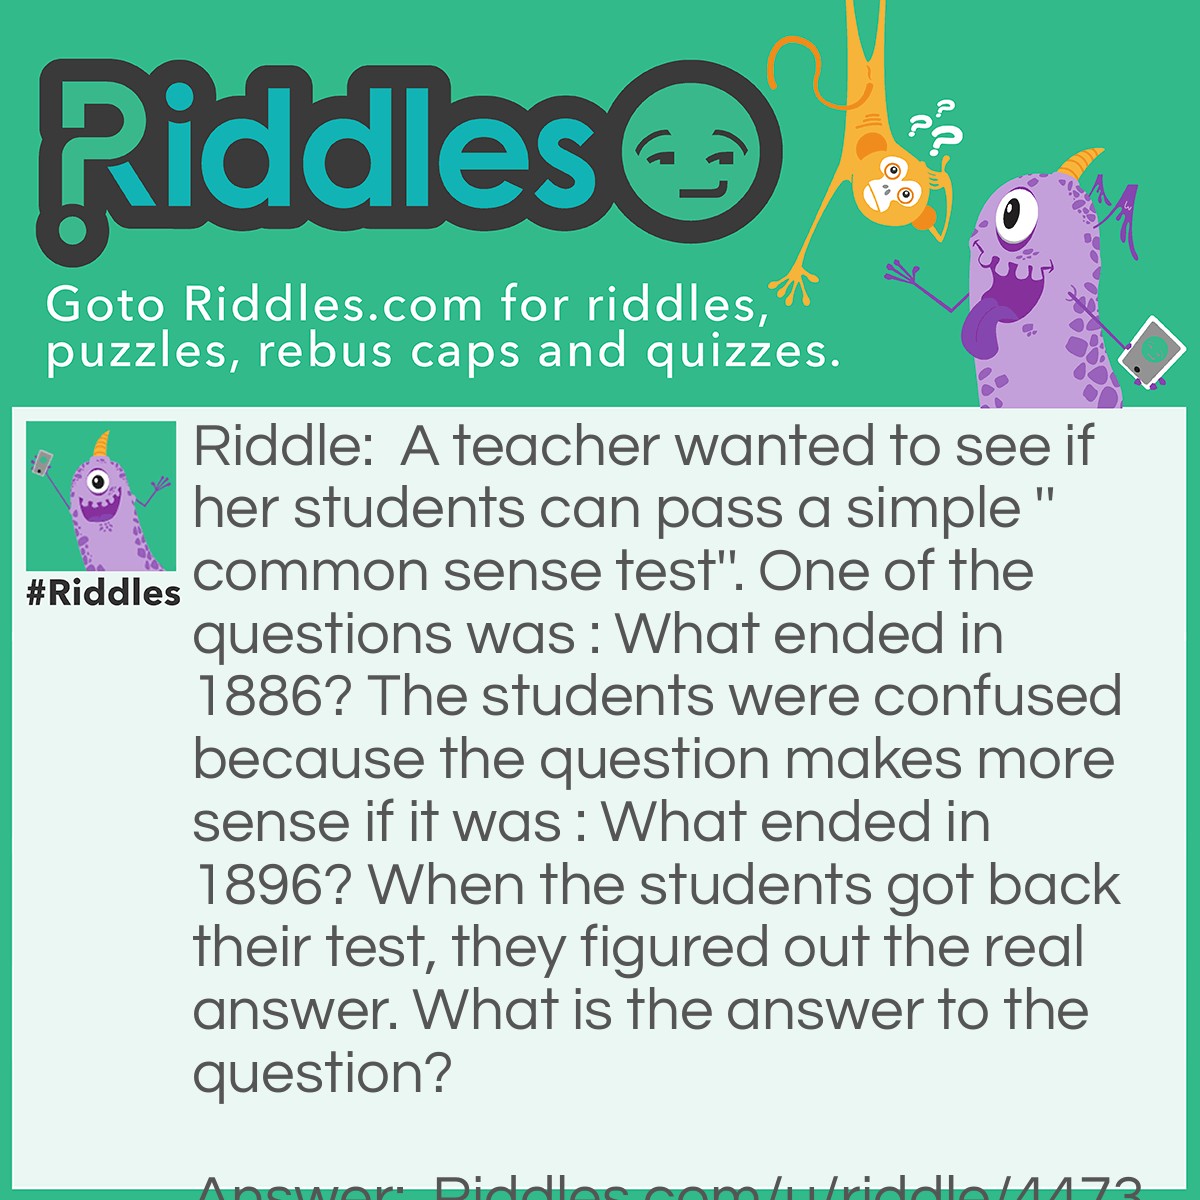 Riddle: A teacher wanted to see if her students can pass a simple ''common sense test''. One of the questions was: What ended in 1886? The students were confused because the question makes more sense if it was: What ended in 1886? When the students got back their test, they figured out the real answer. What is the answer to the question? Answer: 1885 ended in 1886.